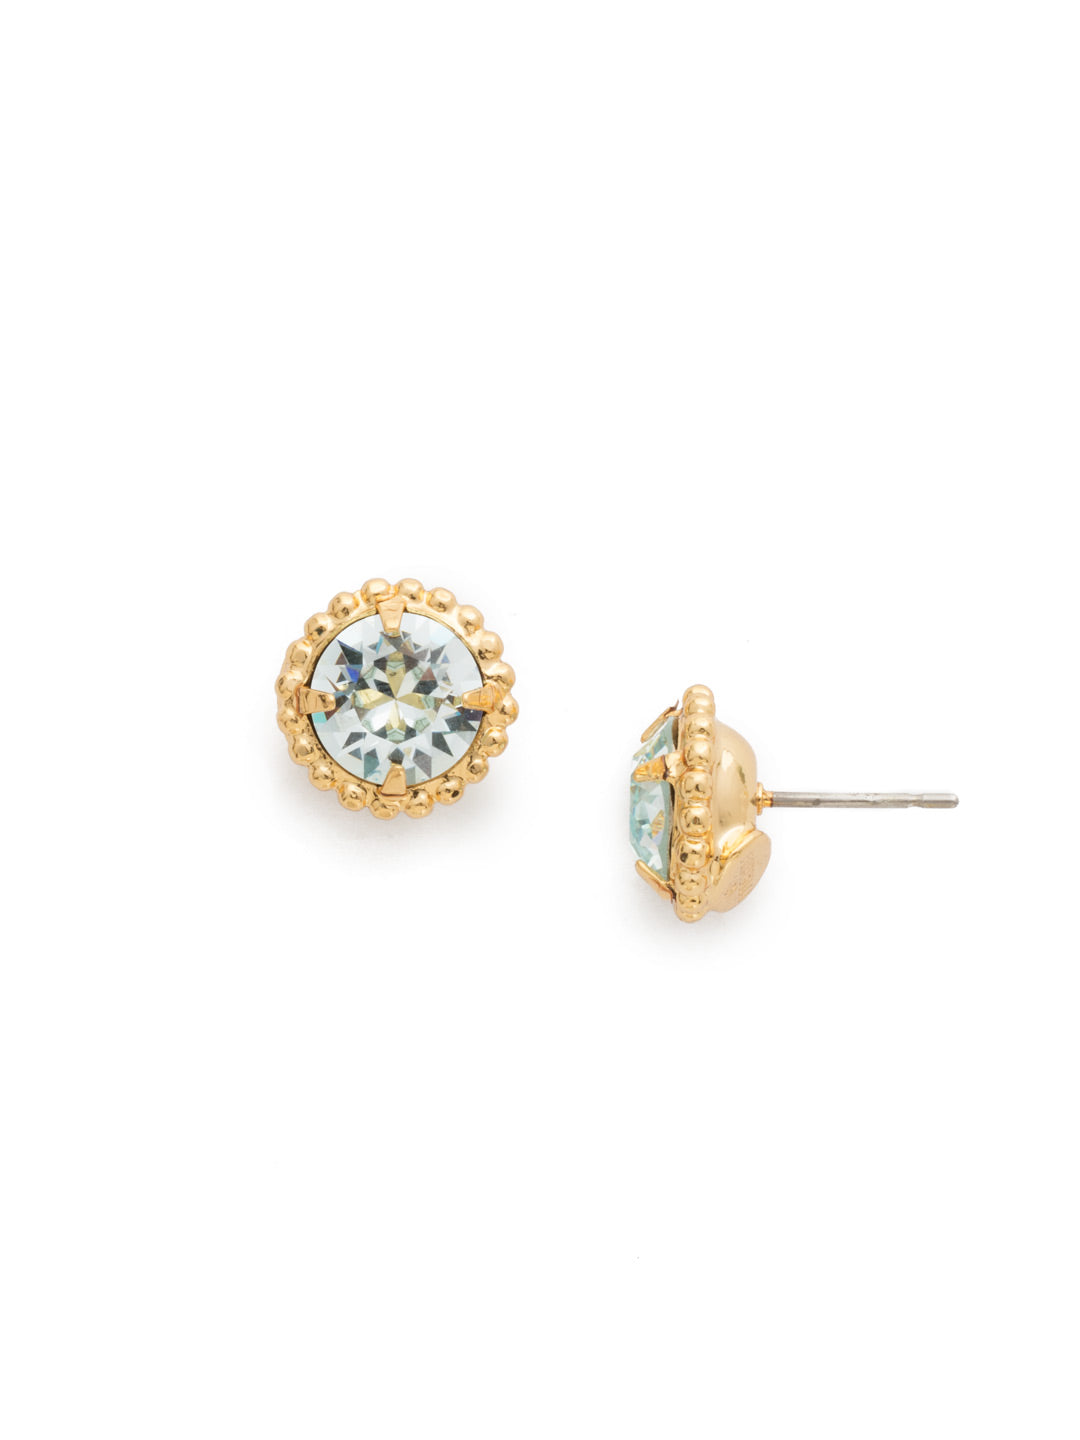 Product Image: Simplicity Stud Earrings